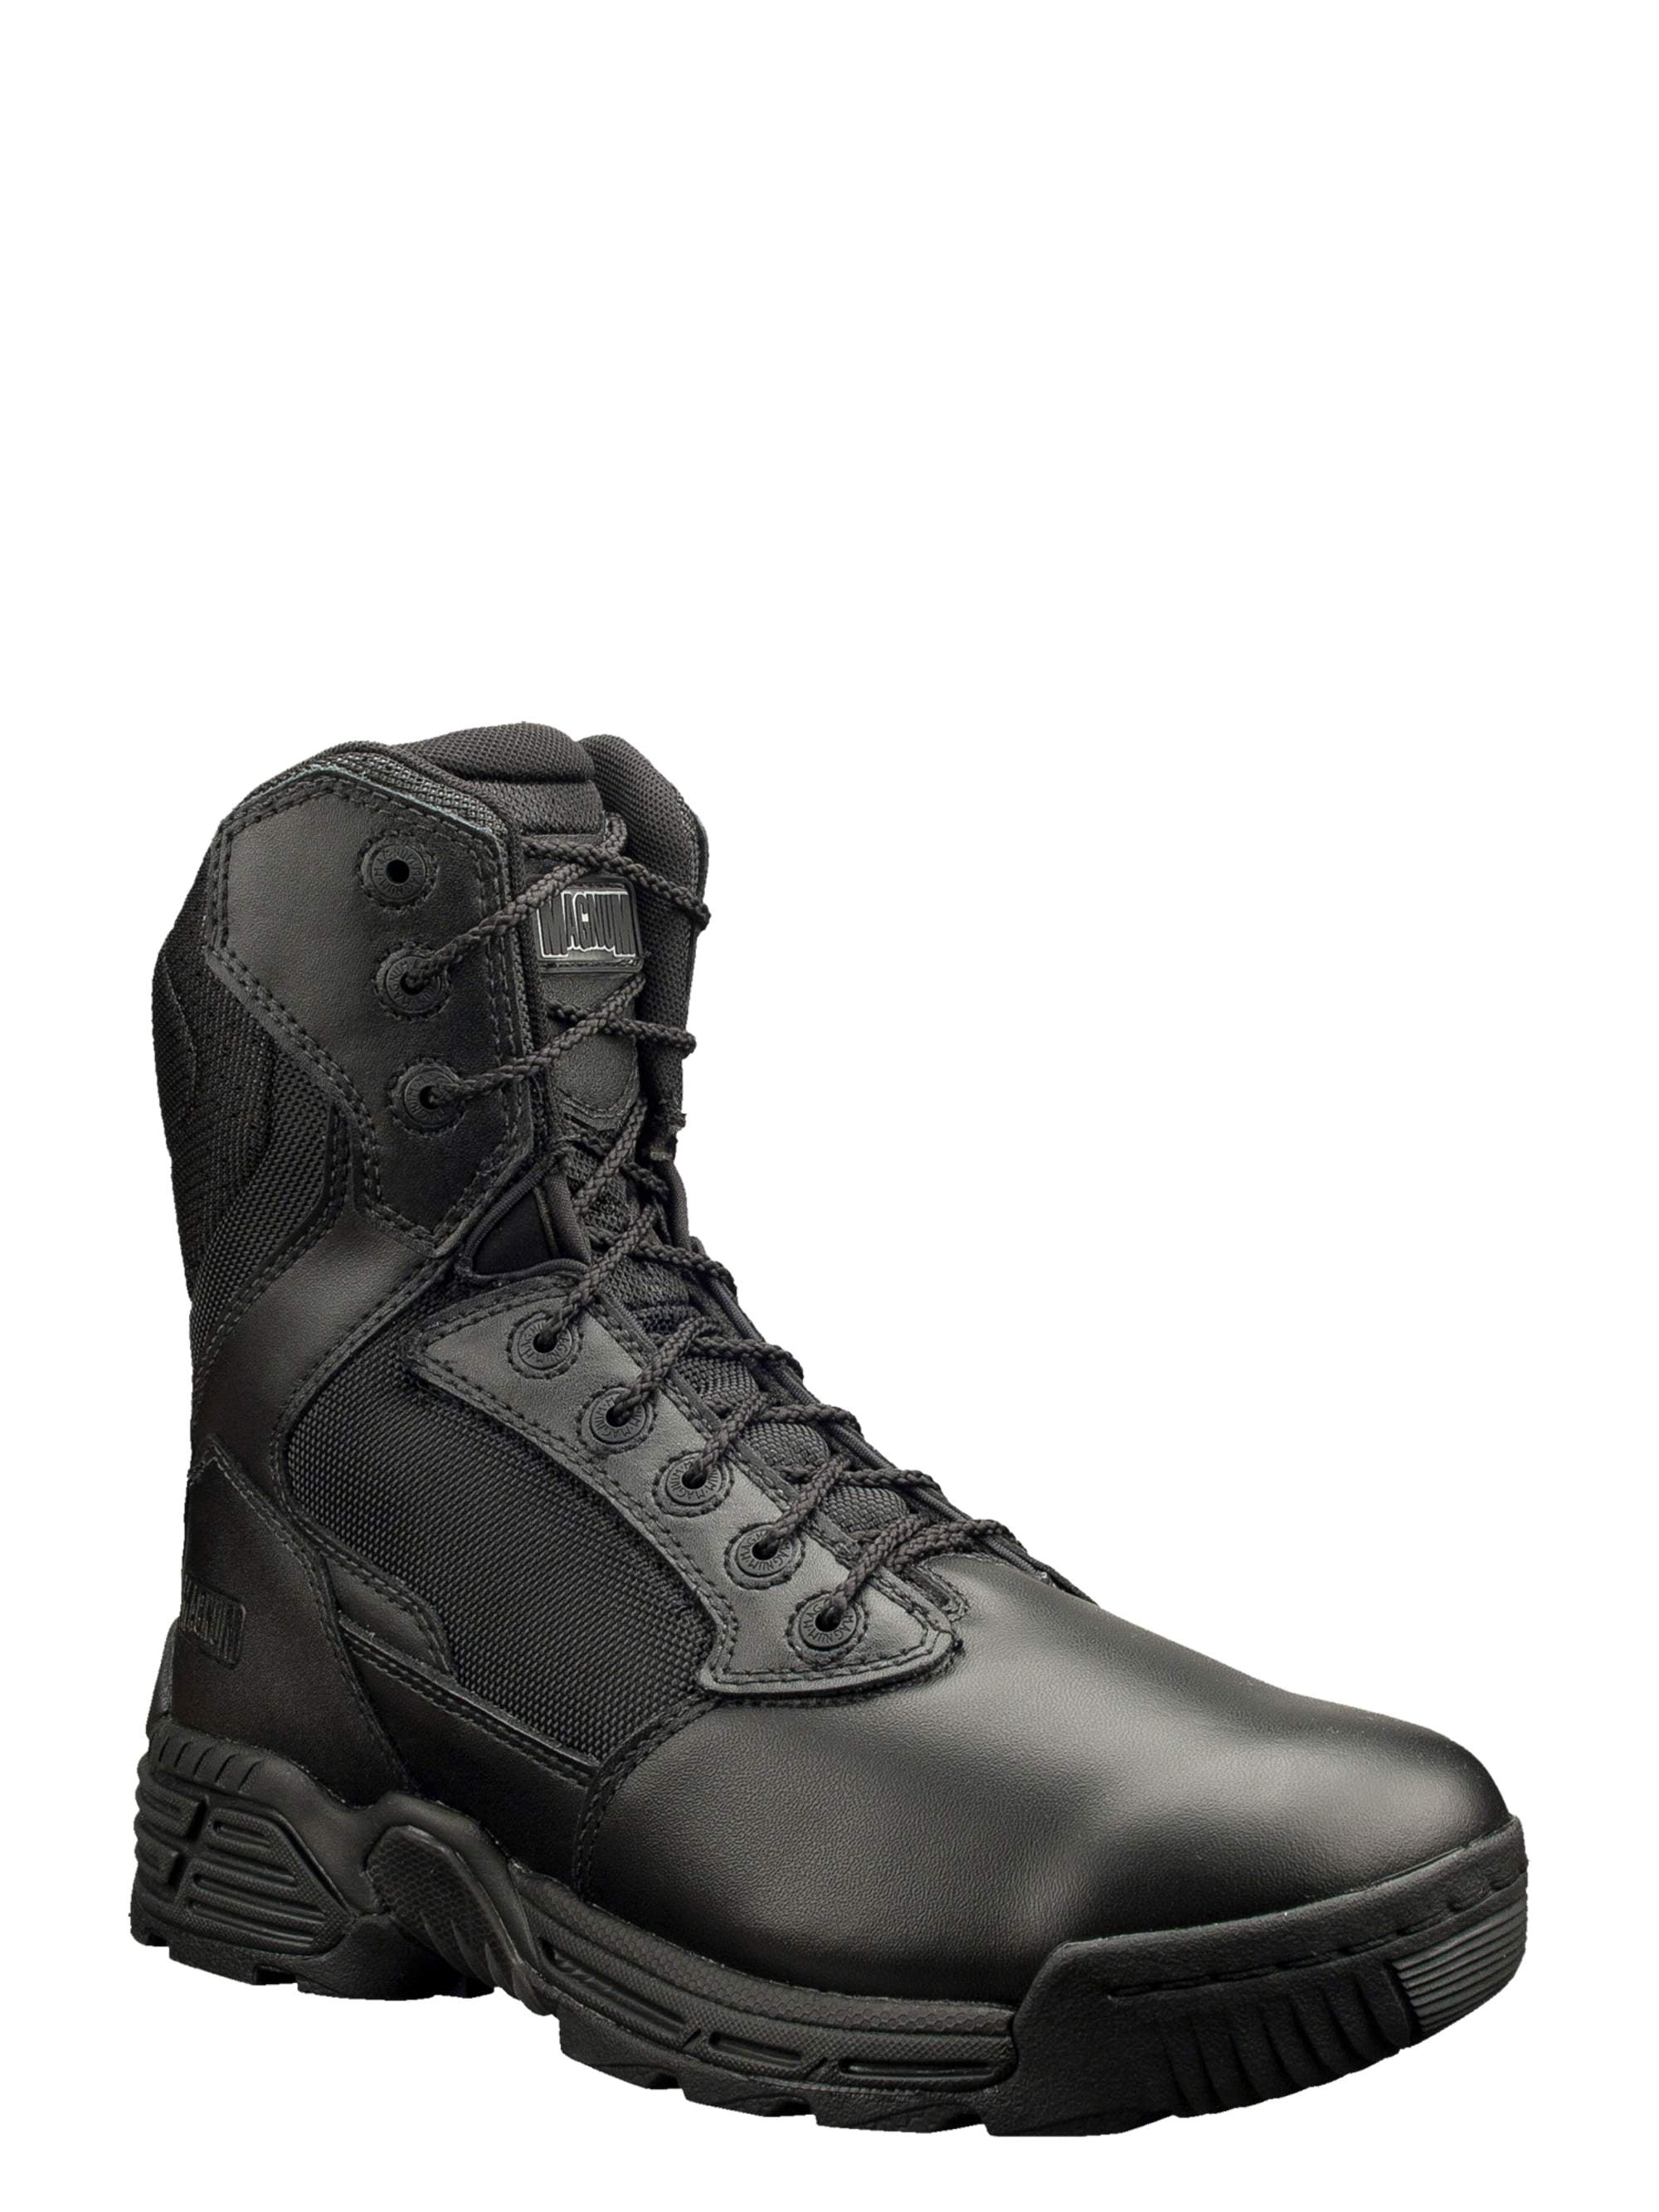 Magnum Mens Stealth Force 8.0 Side Zip Waterproof I-Shield Military and Tactical Boot